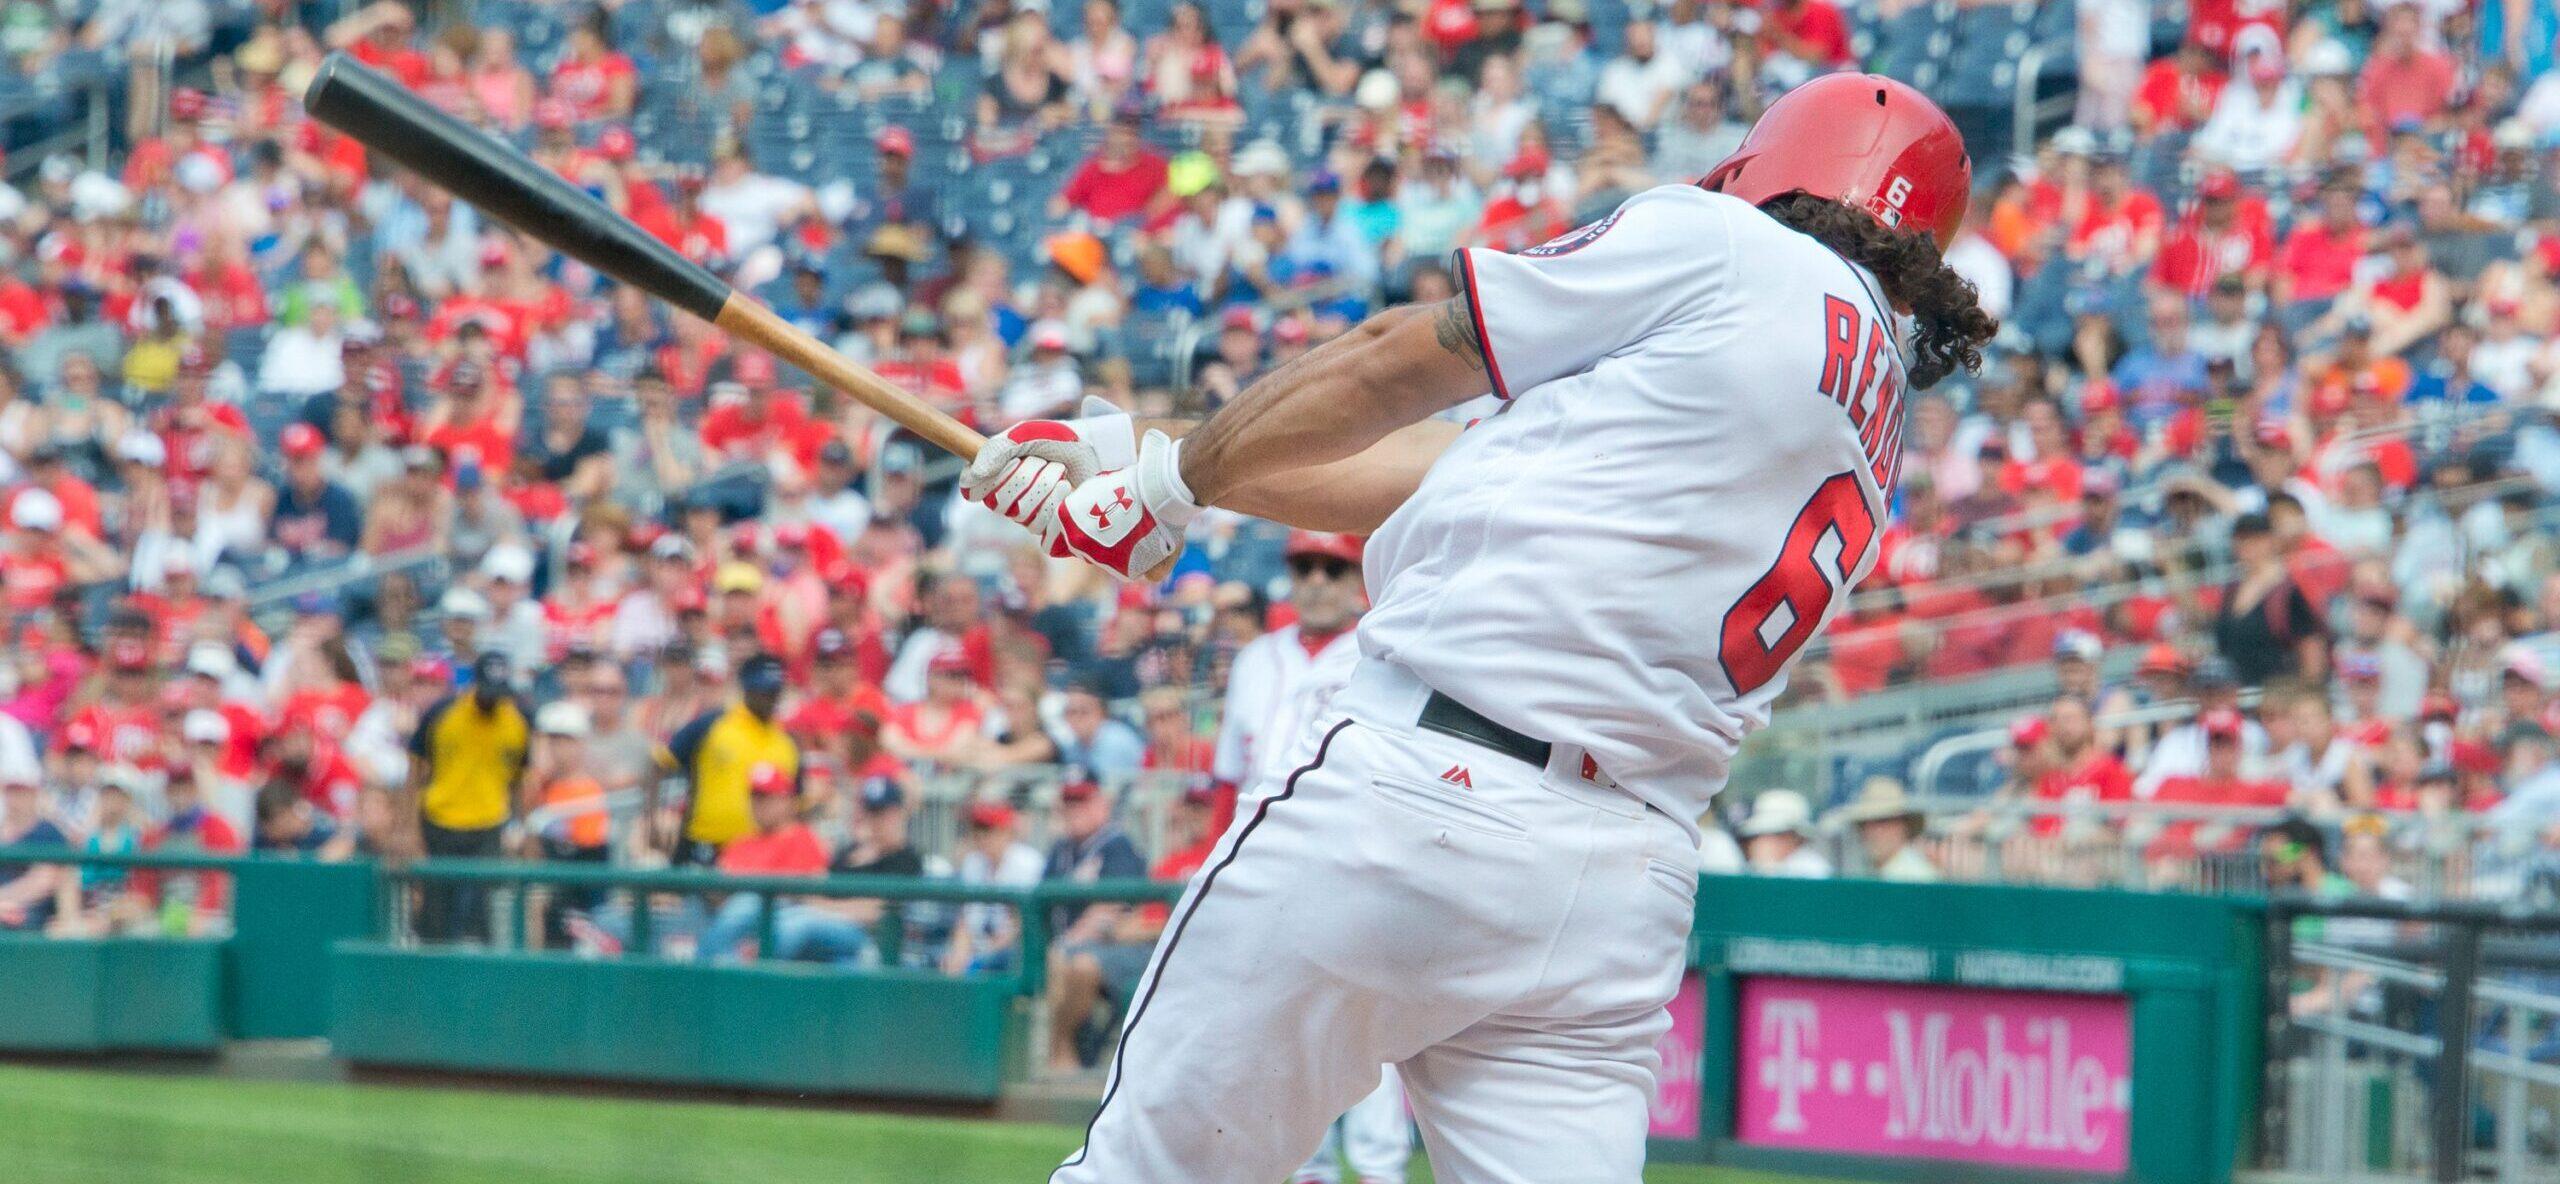 Why MLB Fans Are Calling $245M Anthony Rendon ‘Useless’ & ‘Cancerous’